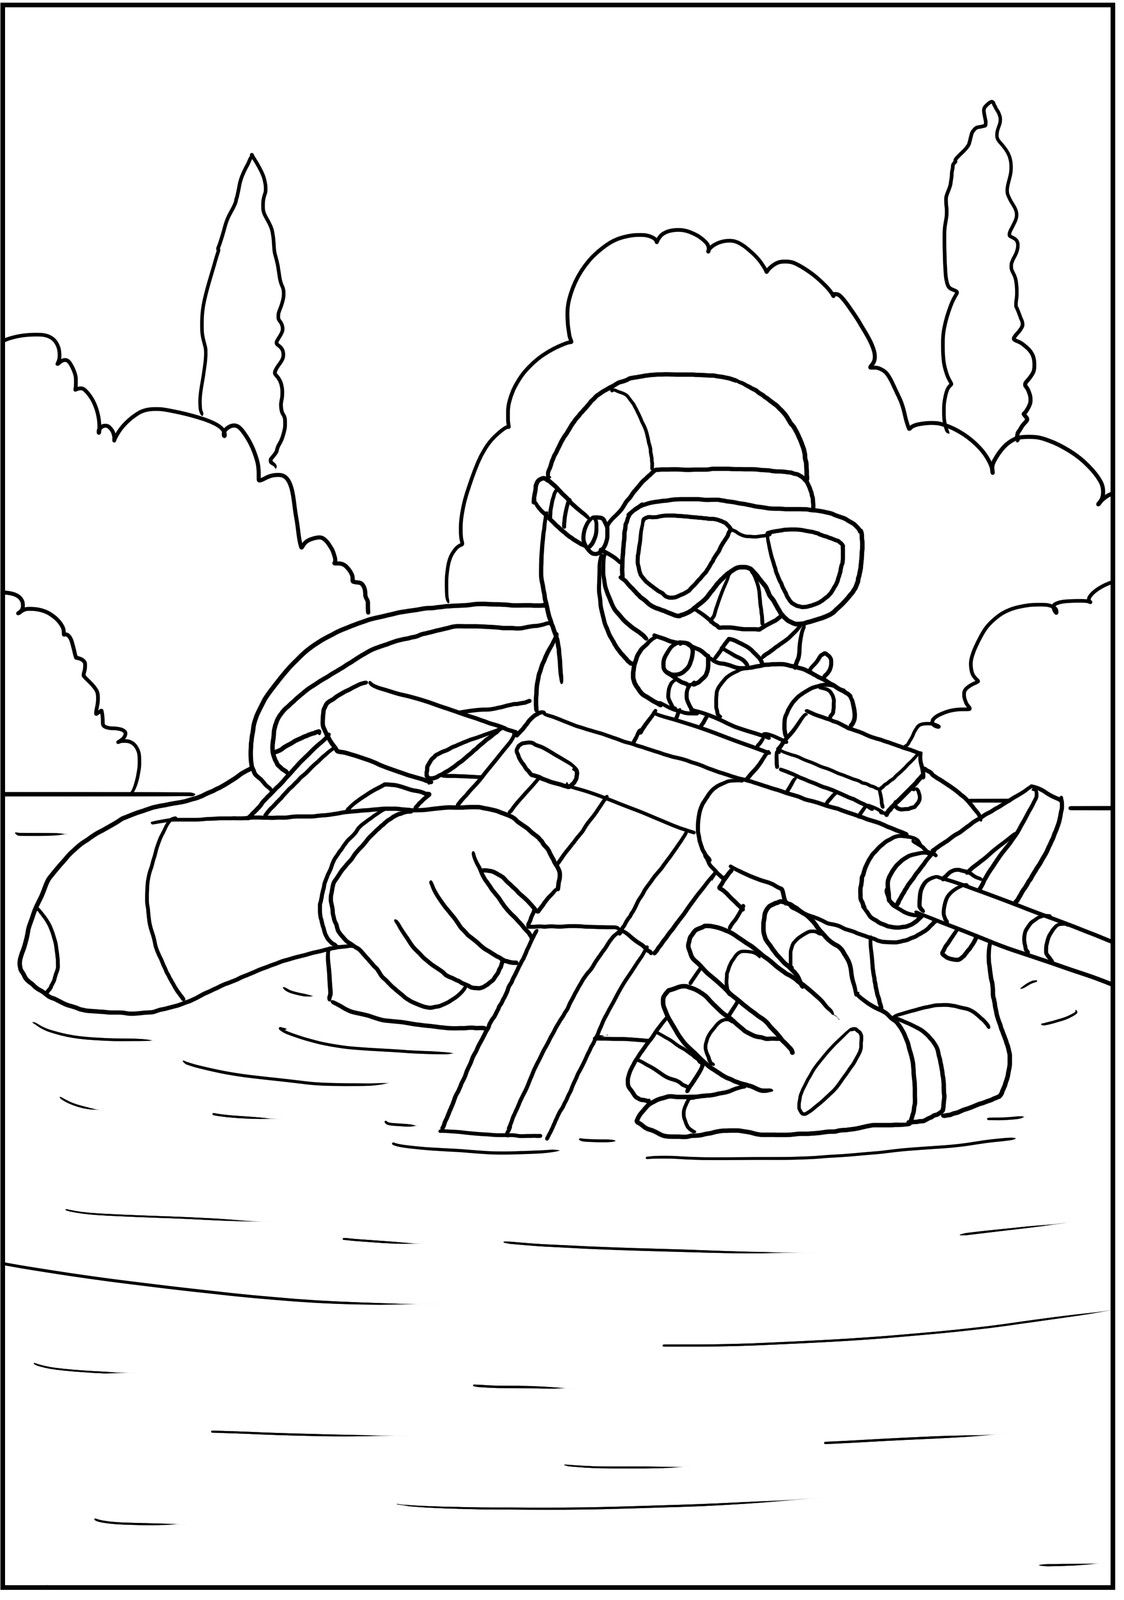 Coloring pages free printable military coloring sheet